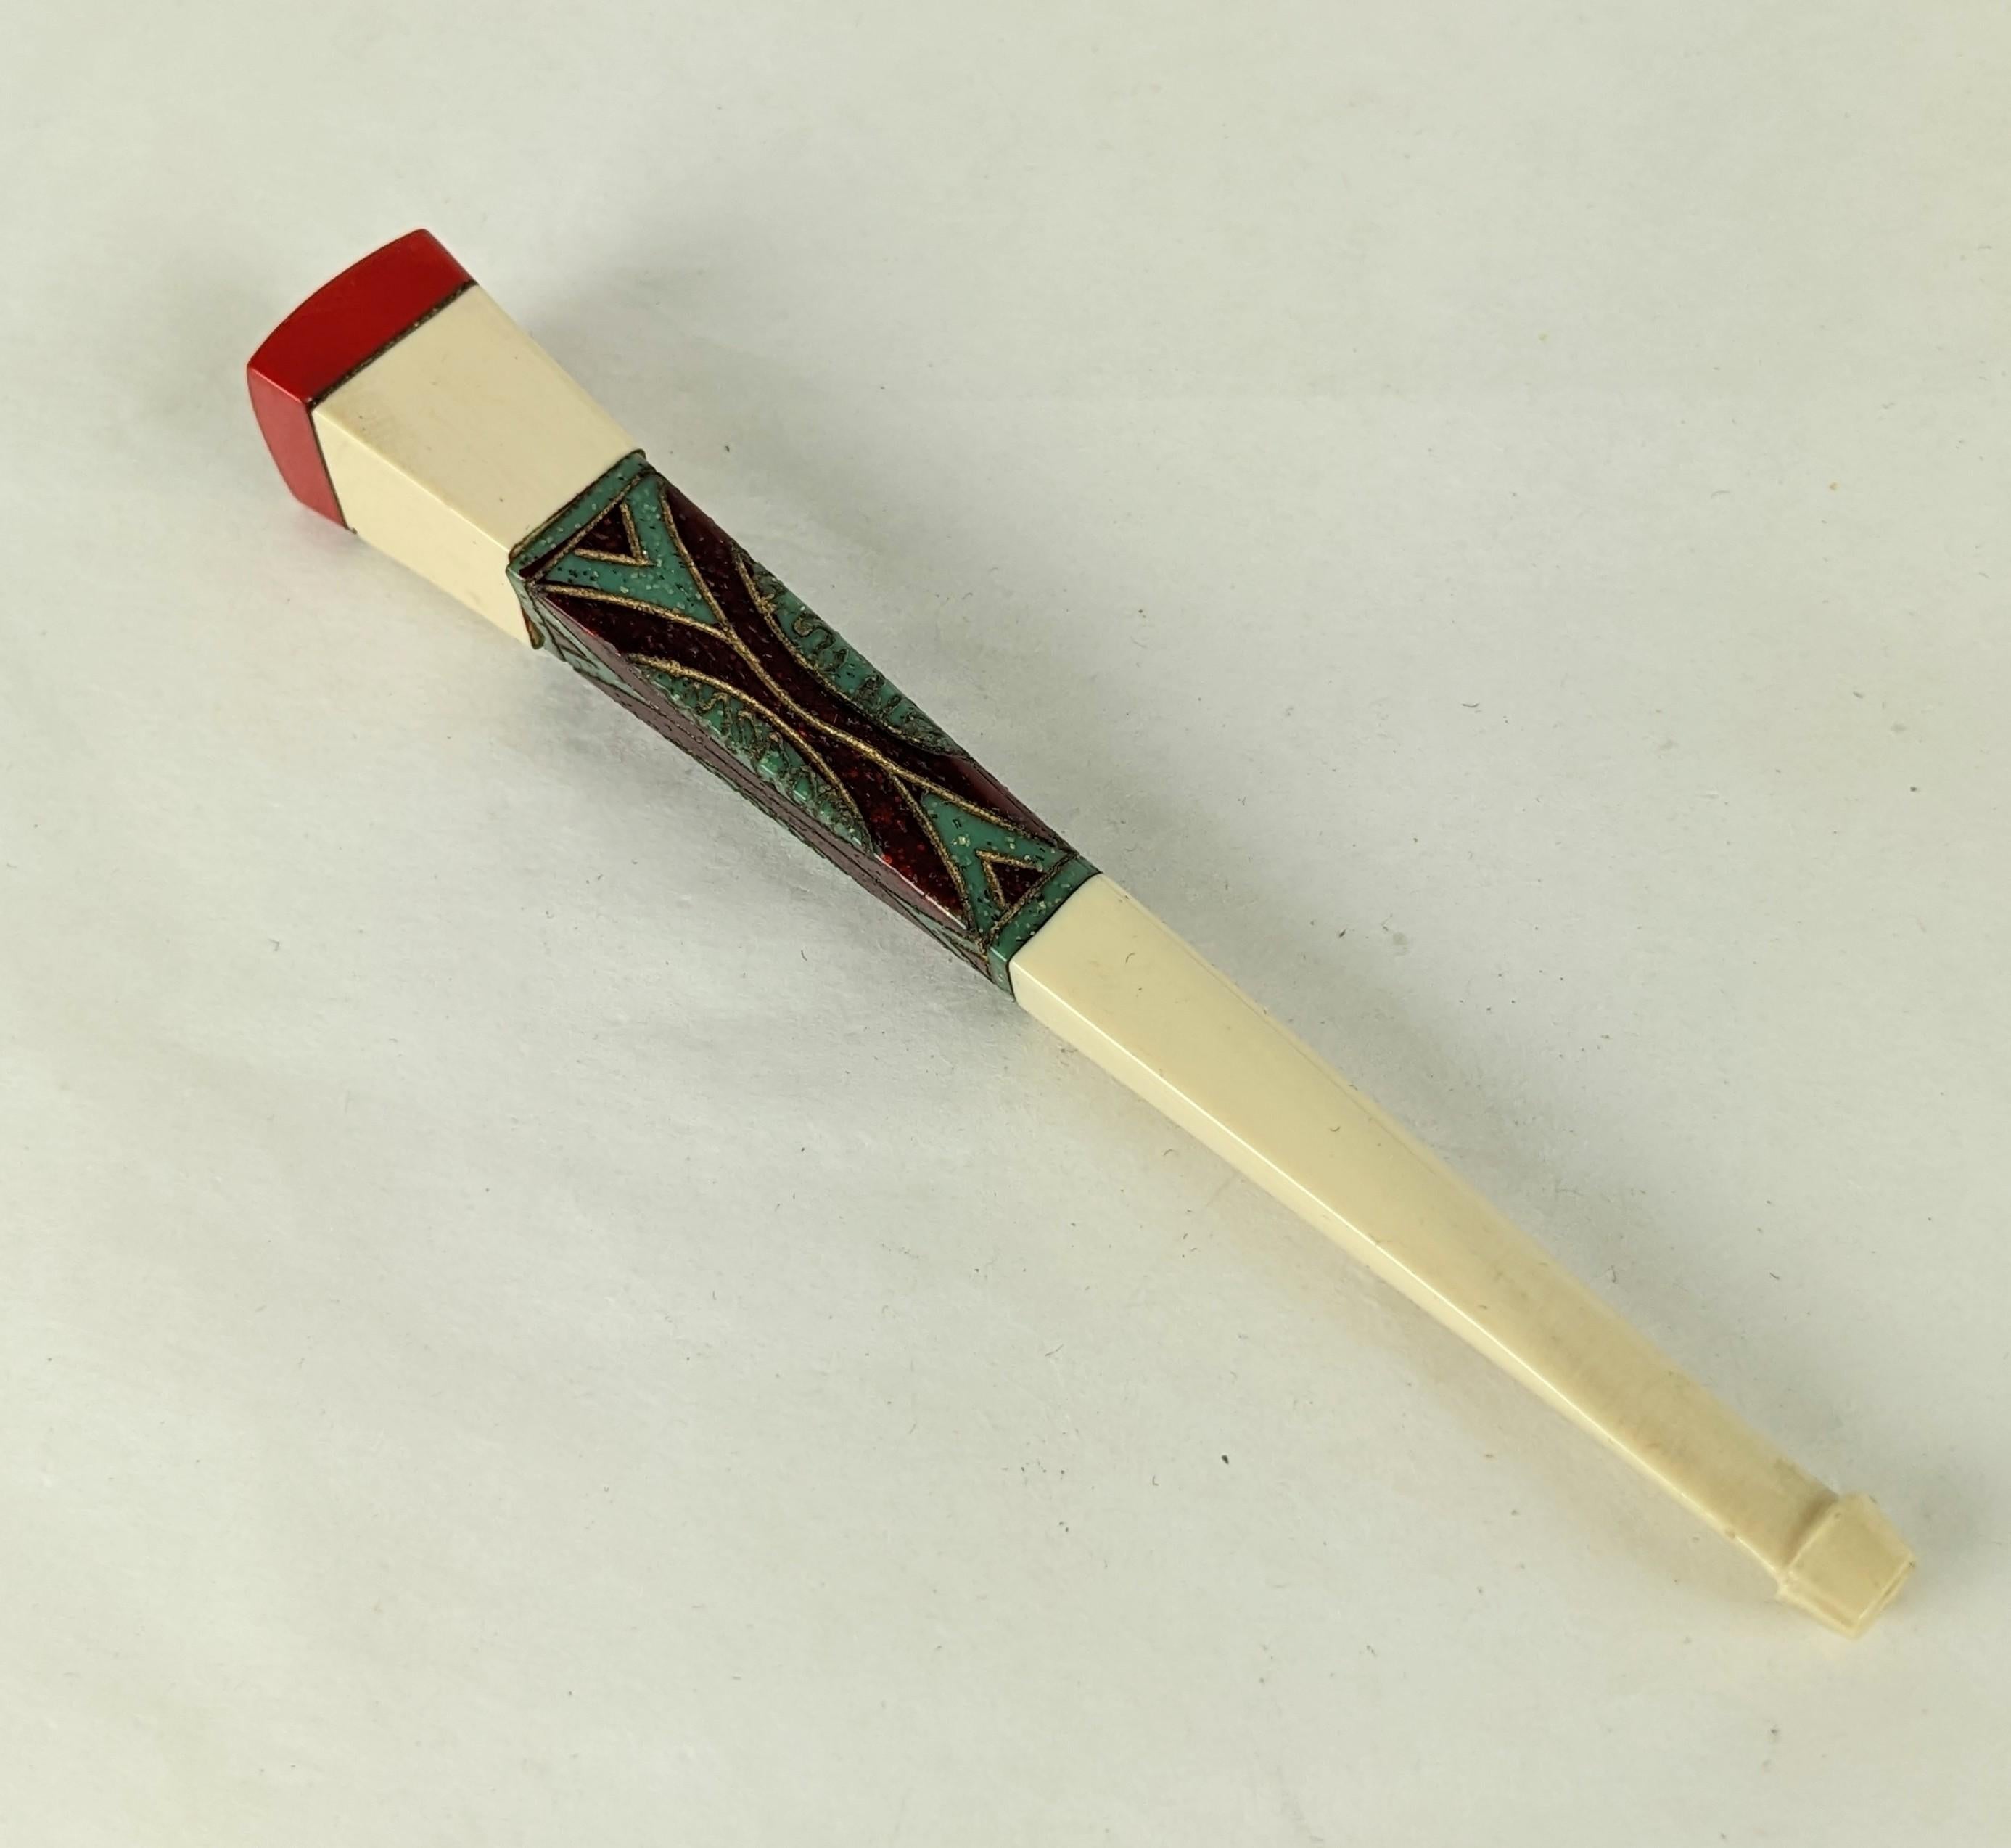 Art Deco Bakelite and Carved Bone Cigarette Holder with Case. Bone carved cigarette holder with bakelite station in the Egyptian Revival style in its own black silk faille case lined in ivory calf leather. The bakelite is laminated in deep ruby with